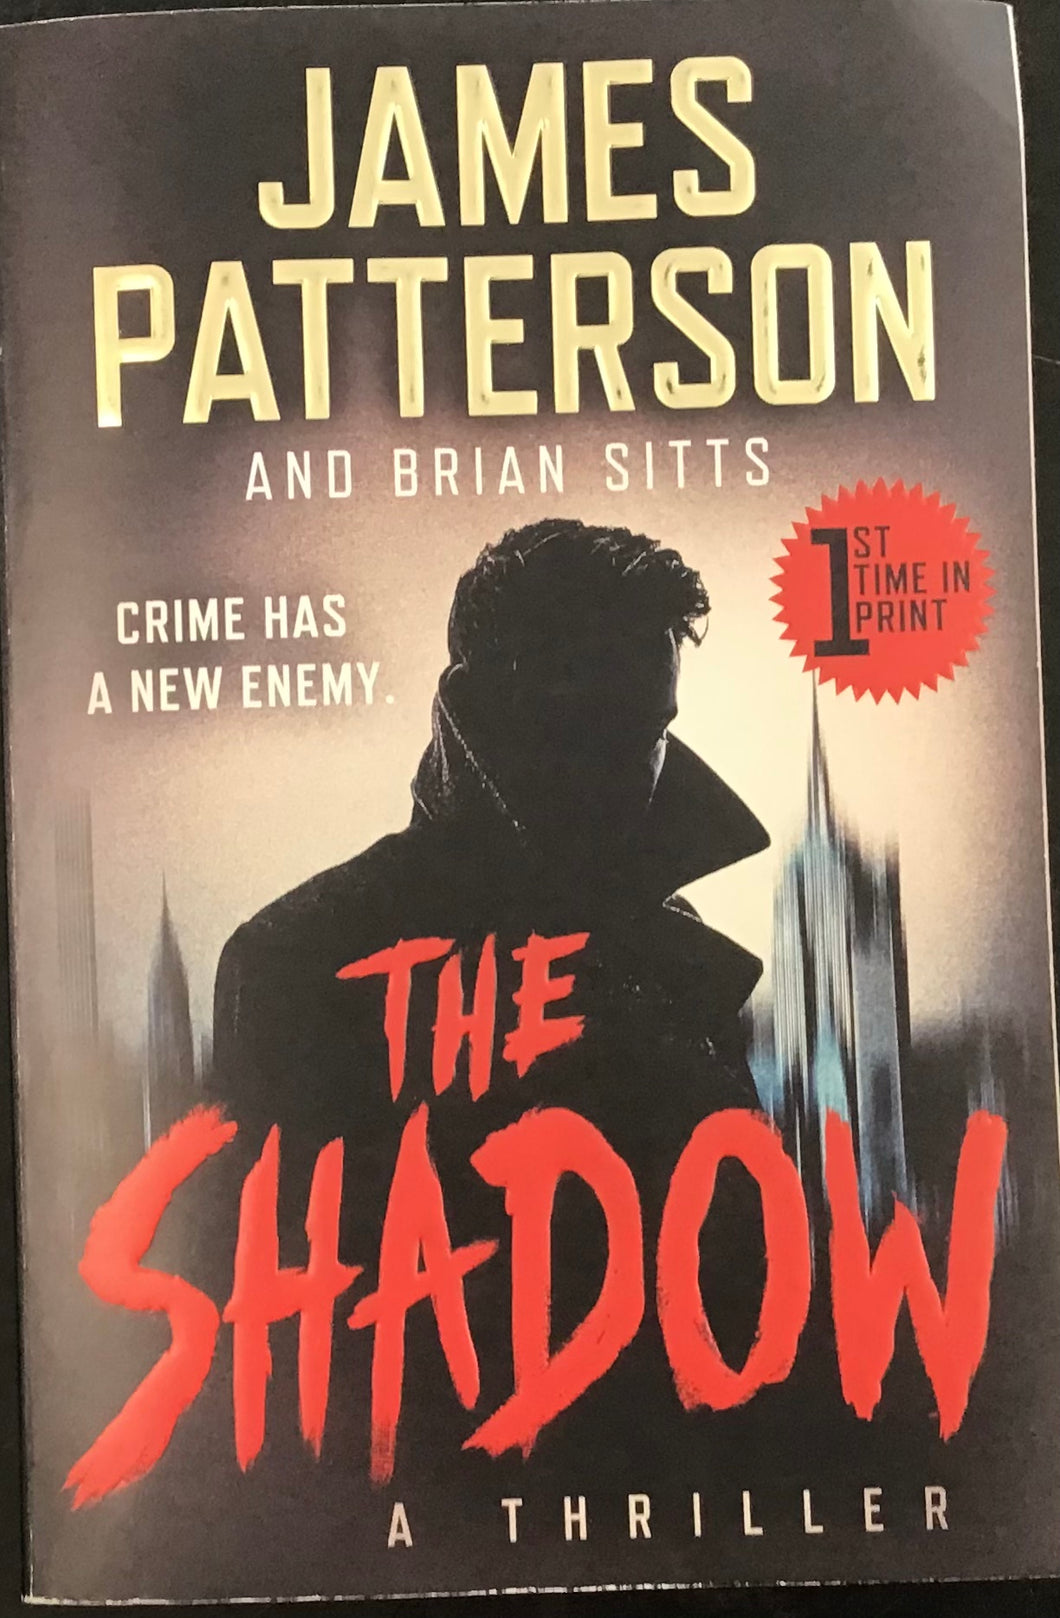 The Shadow, James Patterson